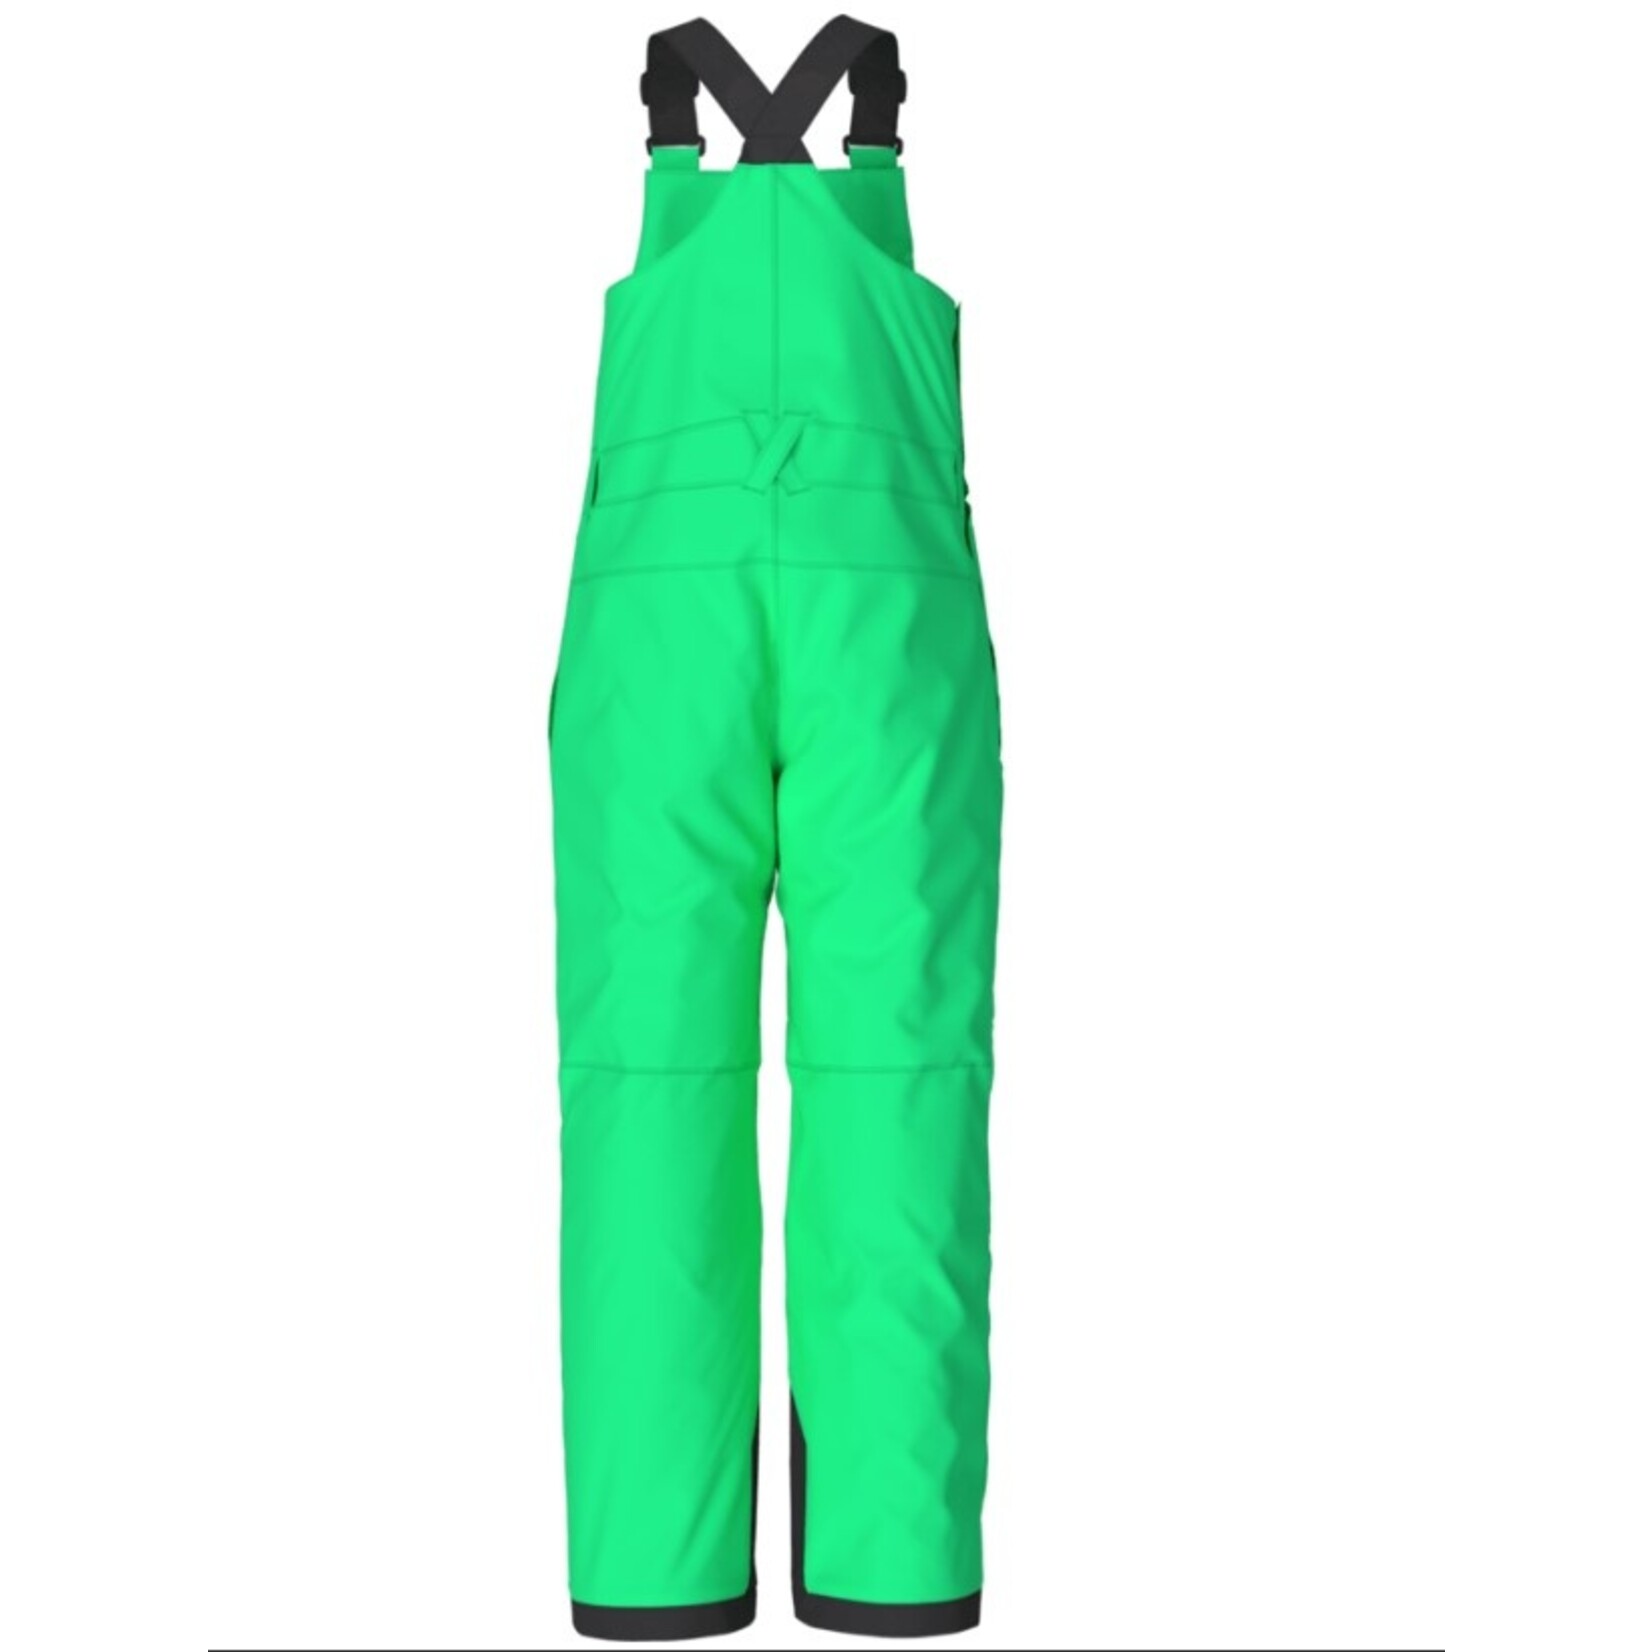 THE NORTH FACE Teen Freedom Insulated Bib-24